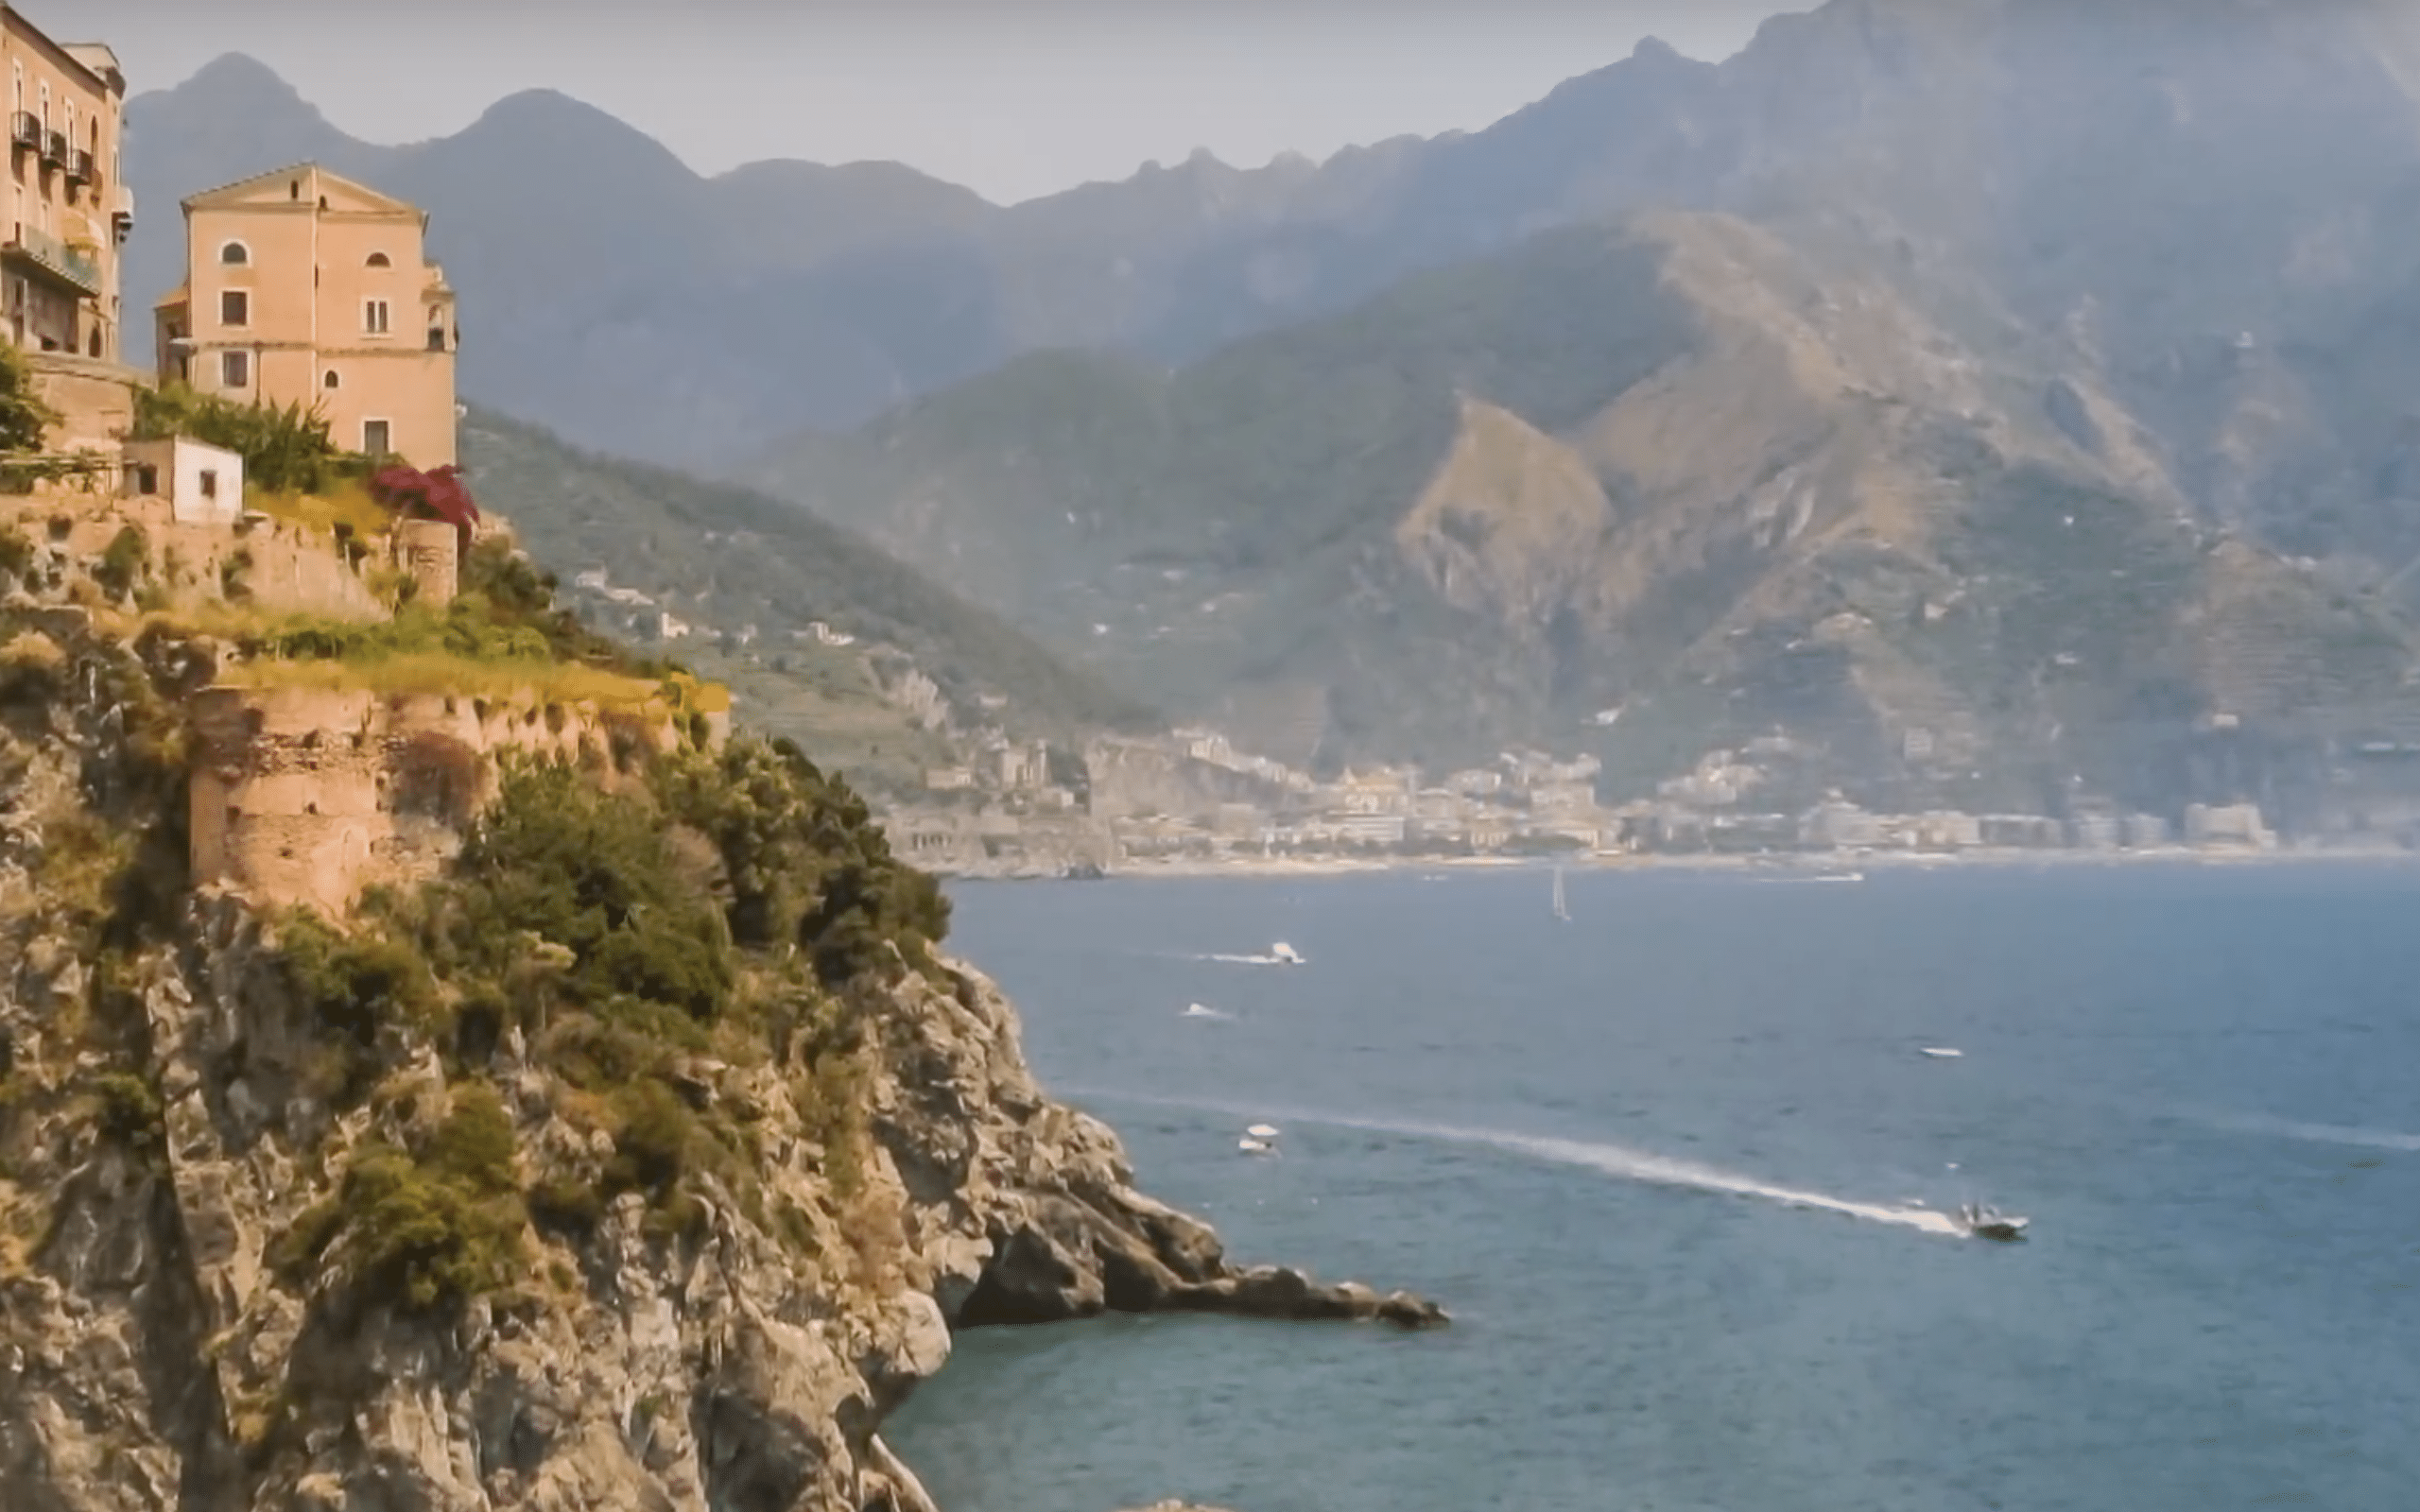 Perillo Tours Italy North Continental Tour Commercial features a beautiful landscape of Northern Italy village with the mountains and the water surrounding the villages (video production by Merging Media).